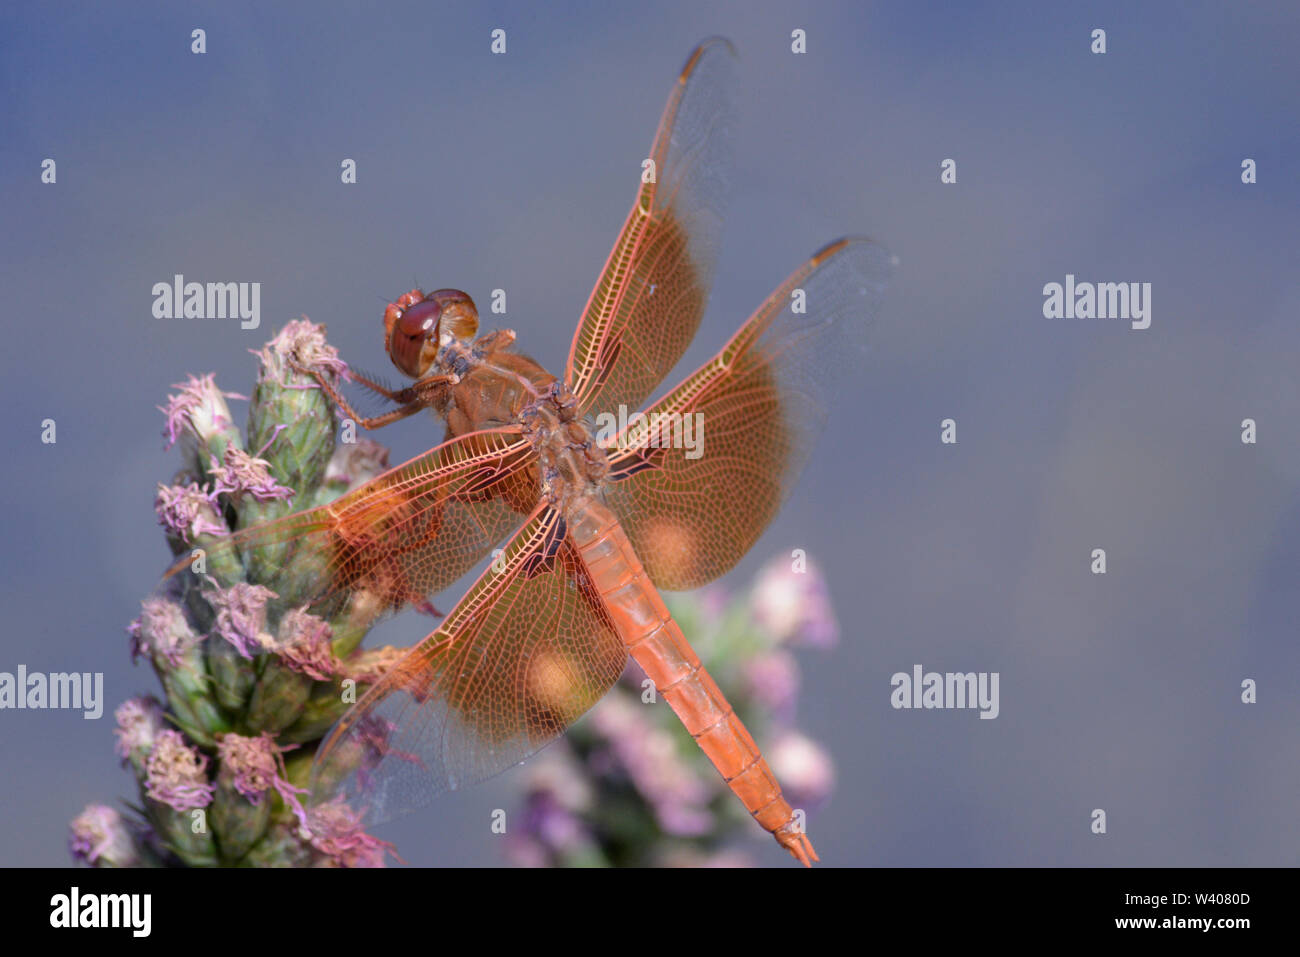 Flame skimmer dragonfly perched on a flower at the edge of a stream. Stock Photo